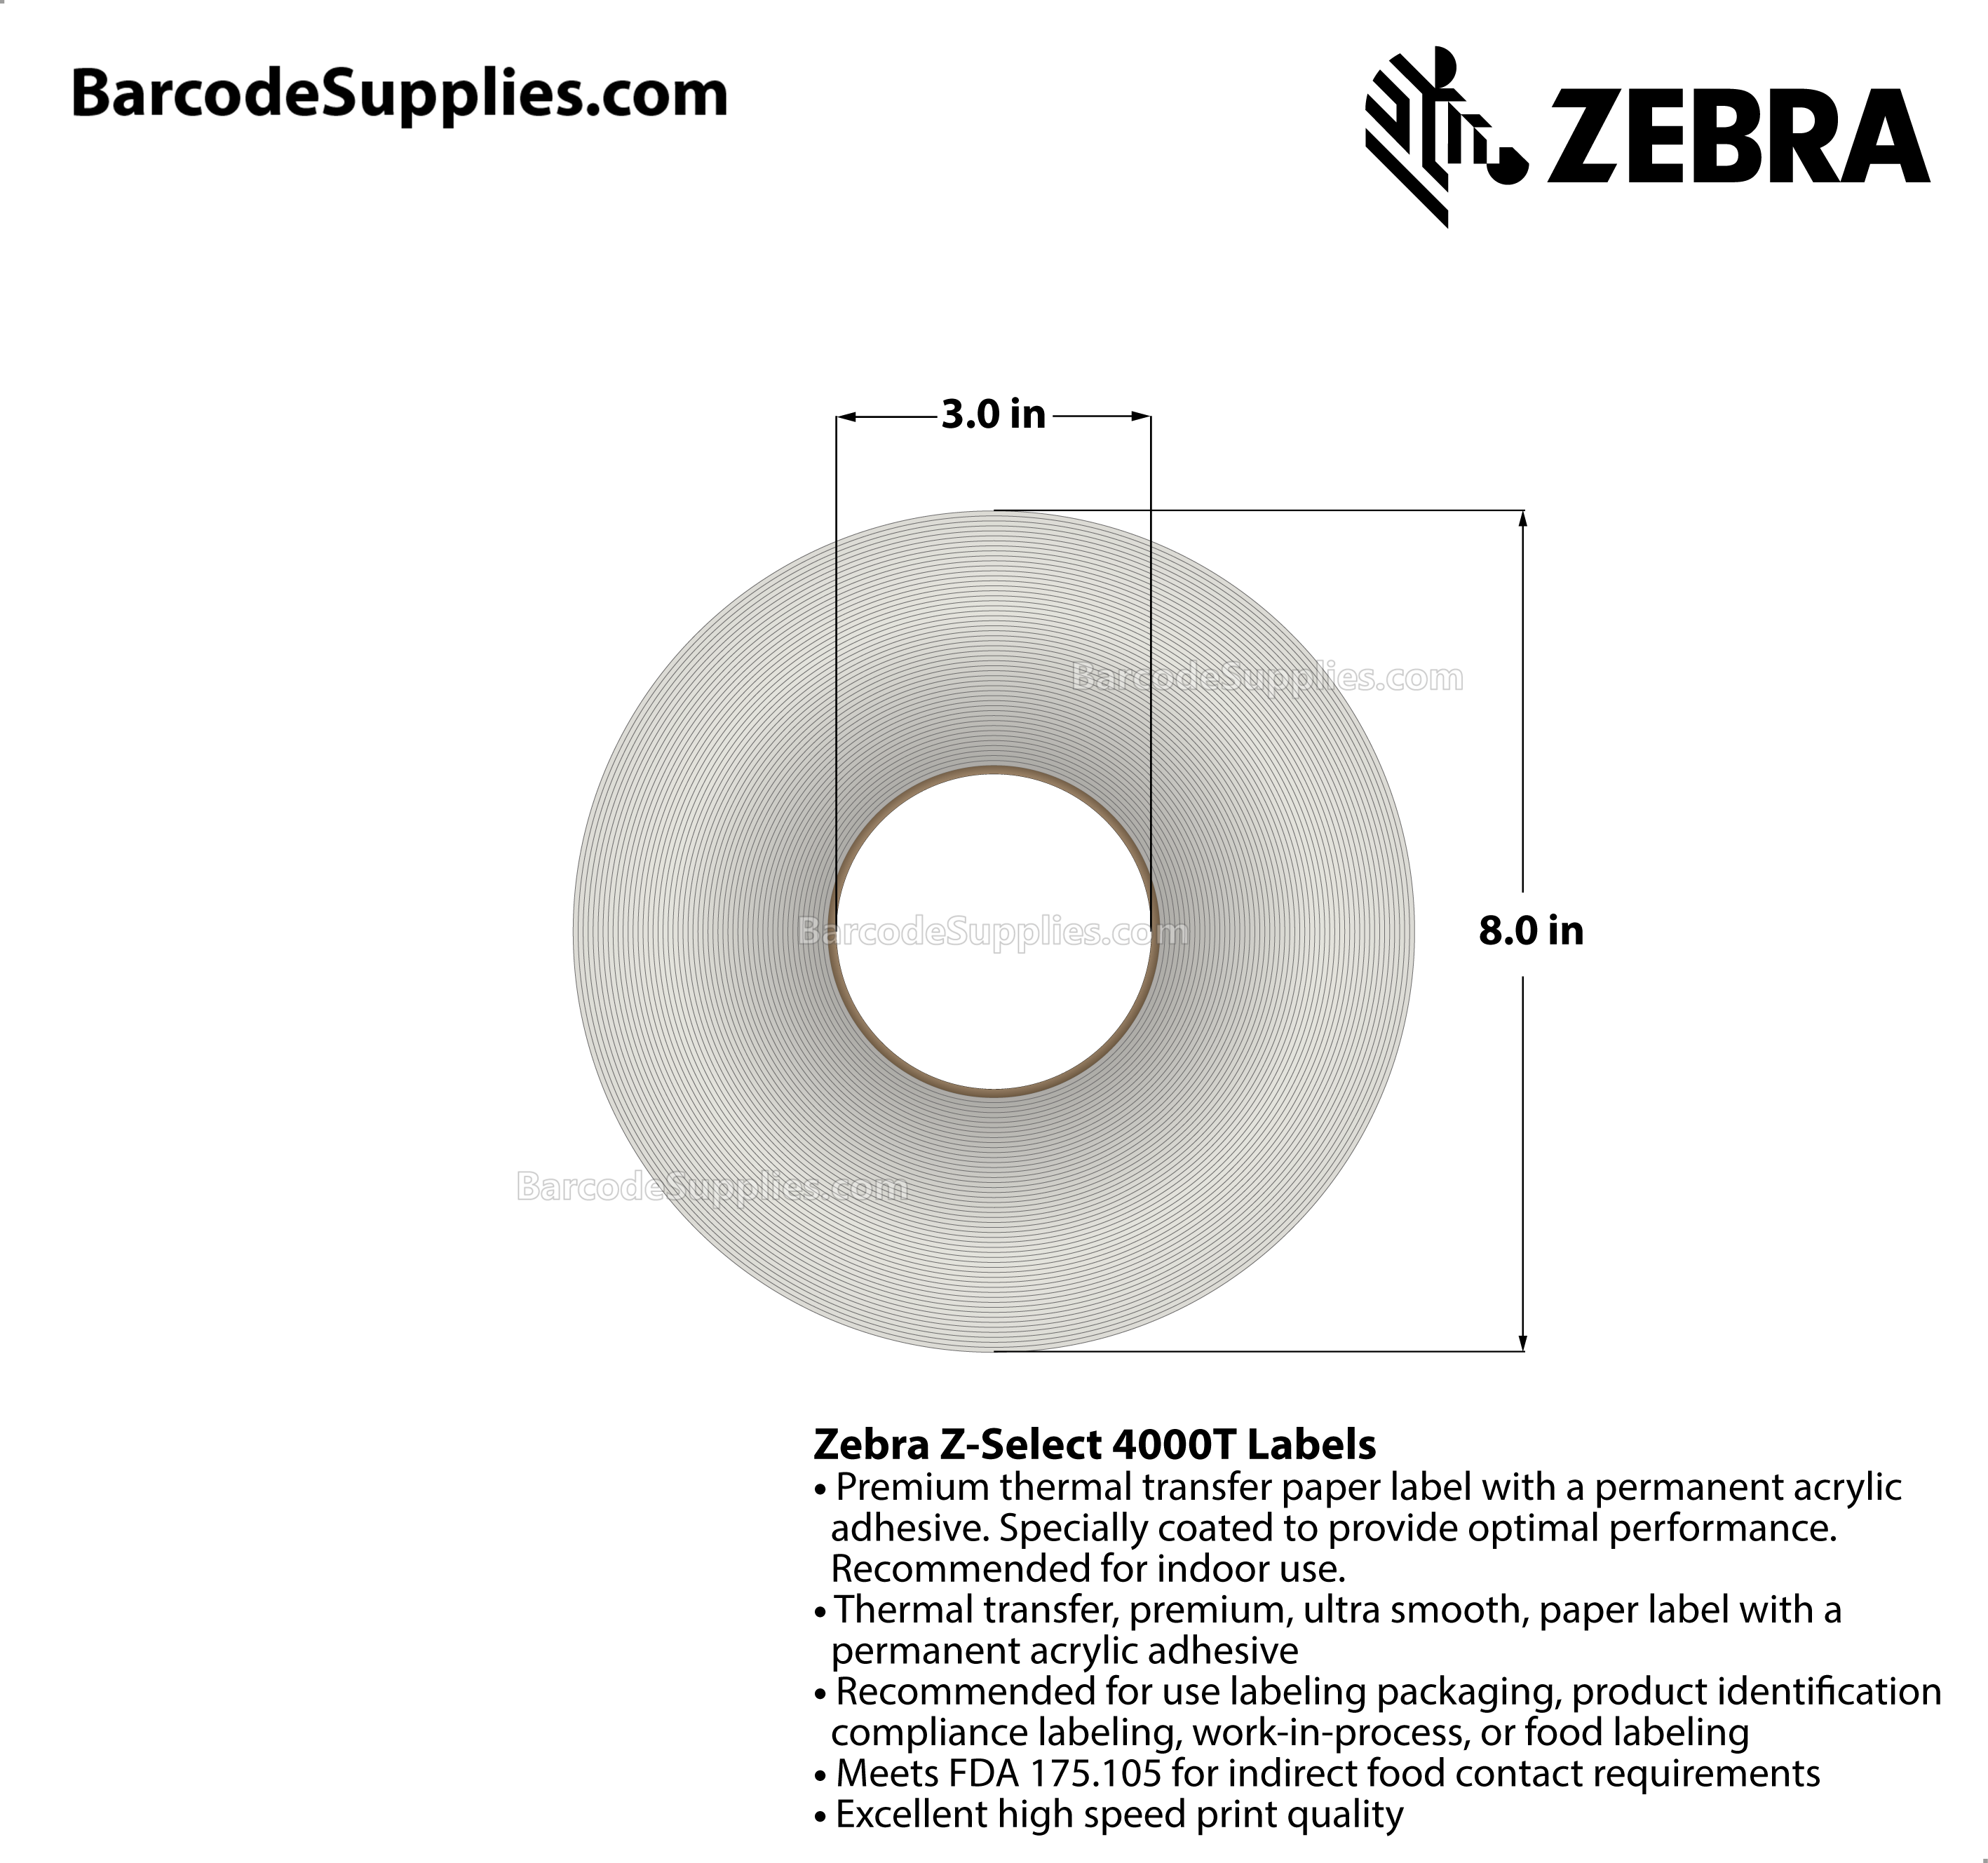 4 x 10 Thermal Transfer White Z-Select 4000T Labels With Permanent Adhesive - Perforated - 550 Labels Per Roll - Carton Of 4 Rolls - 2200 Labels Total - MPN: 94682